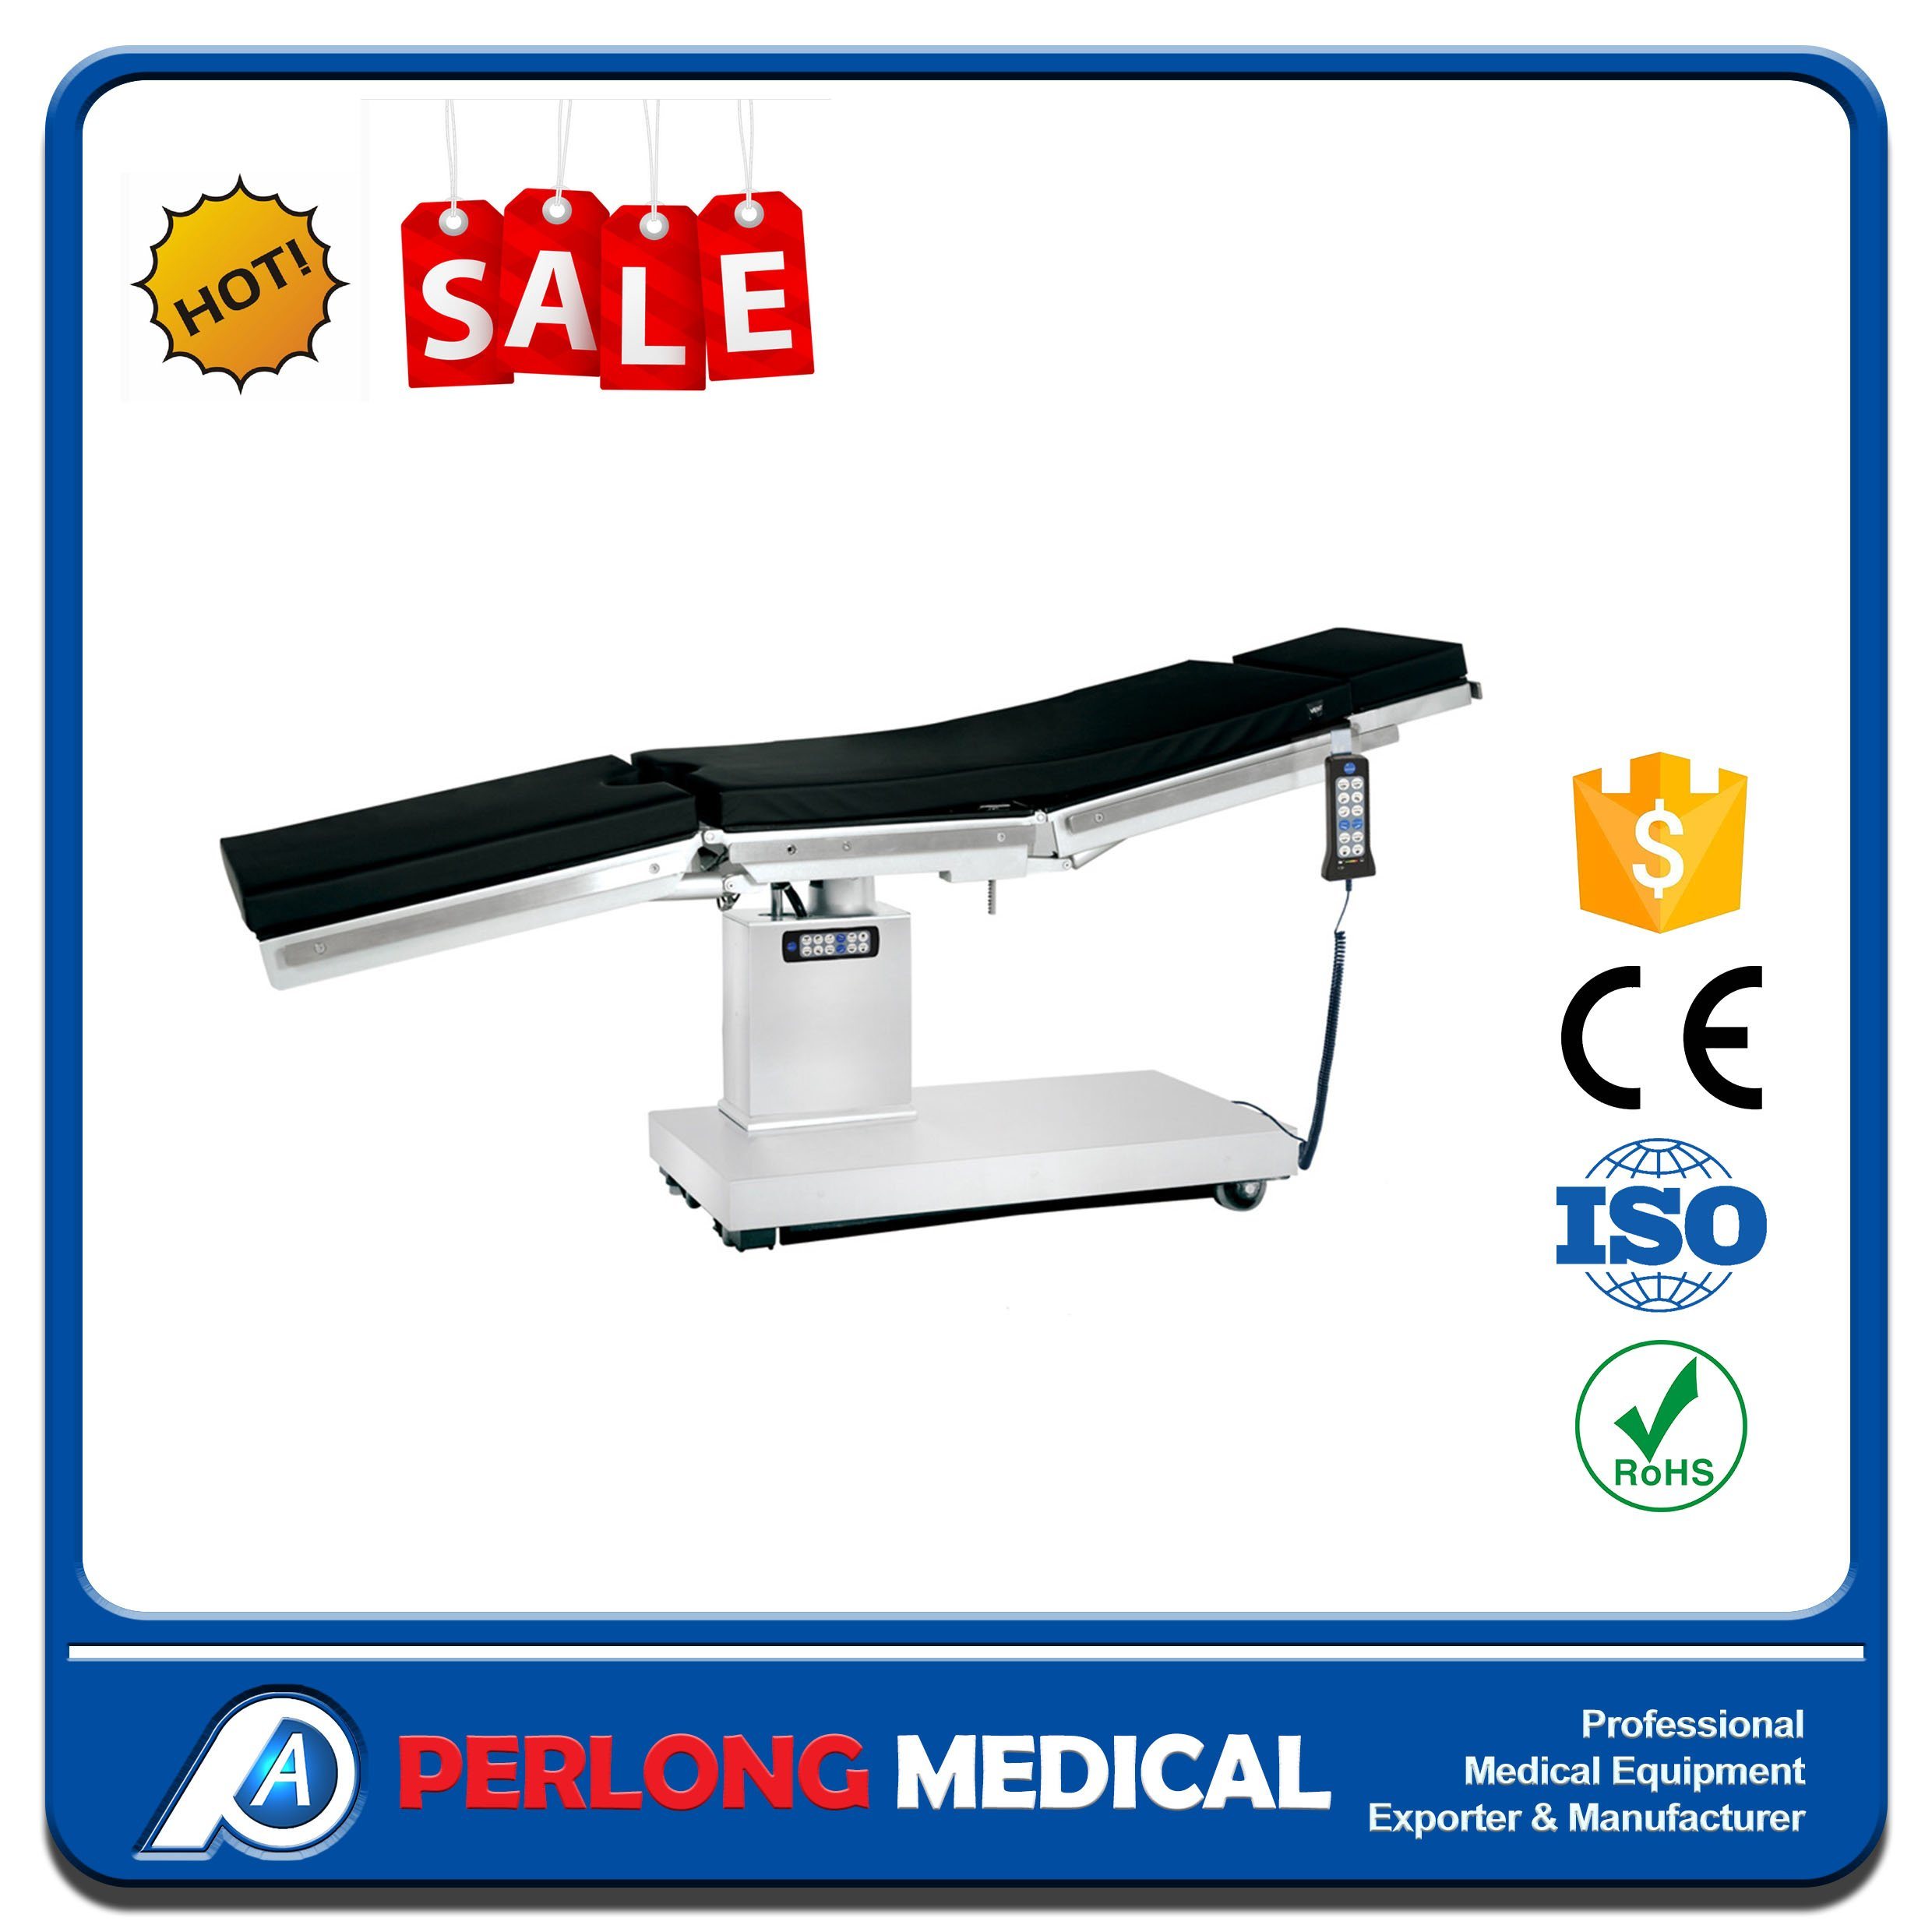 Ot-D. II electric Operation Table Electric Stainless Steel Surgical Table